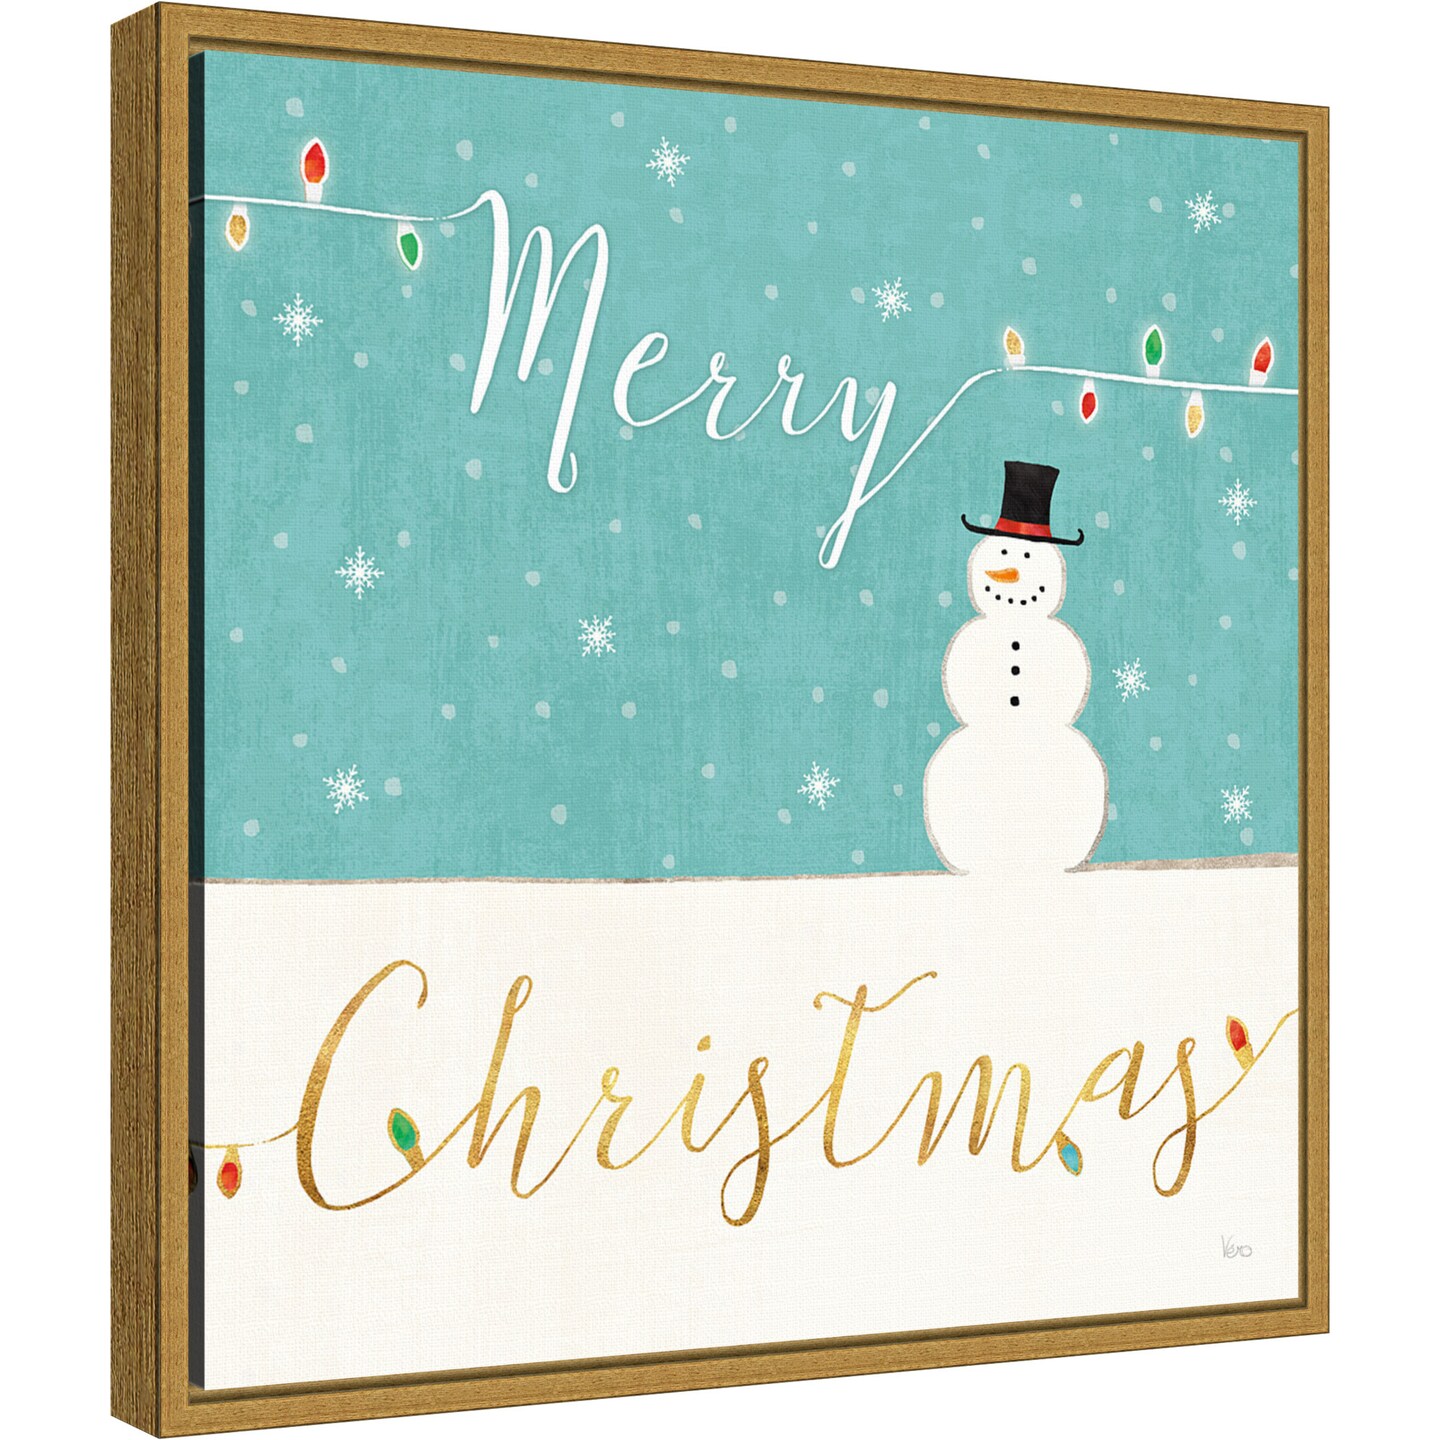 Merry Christmas Snowman by Veronique Charron 16-in. W x 16-in. H. Canvas Wall Art Print Framed in Gold